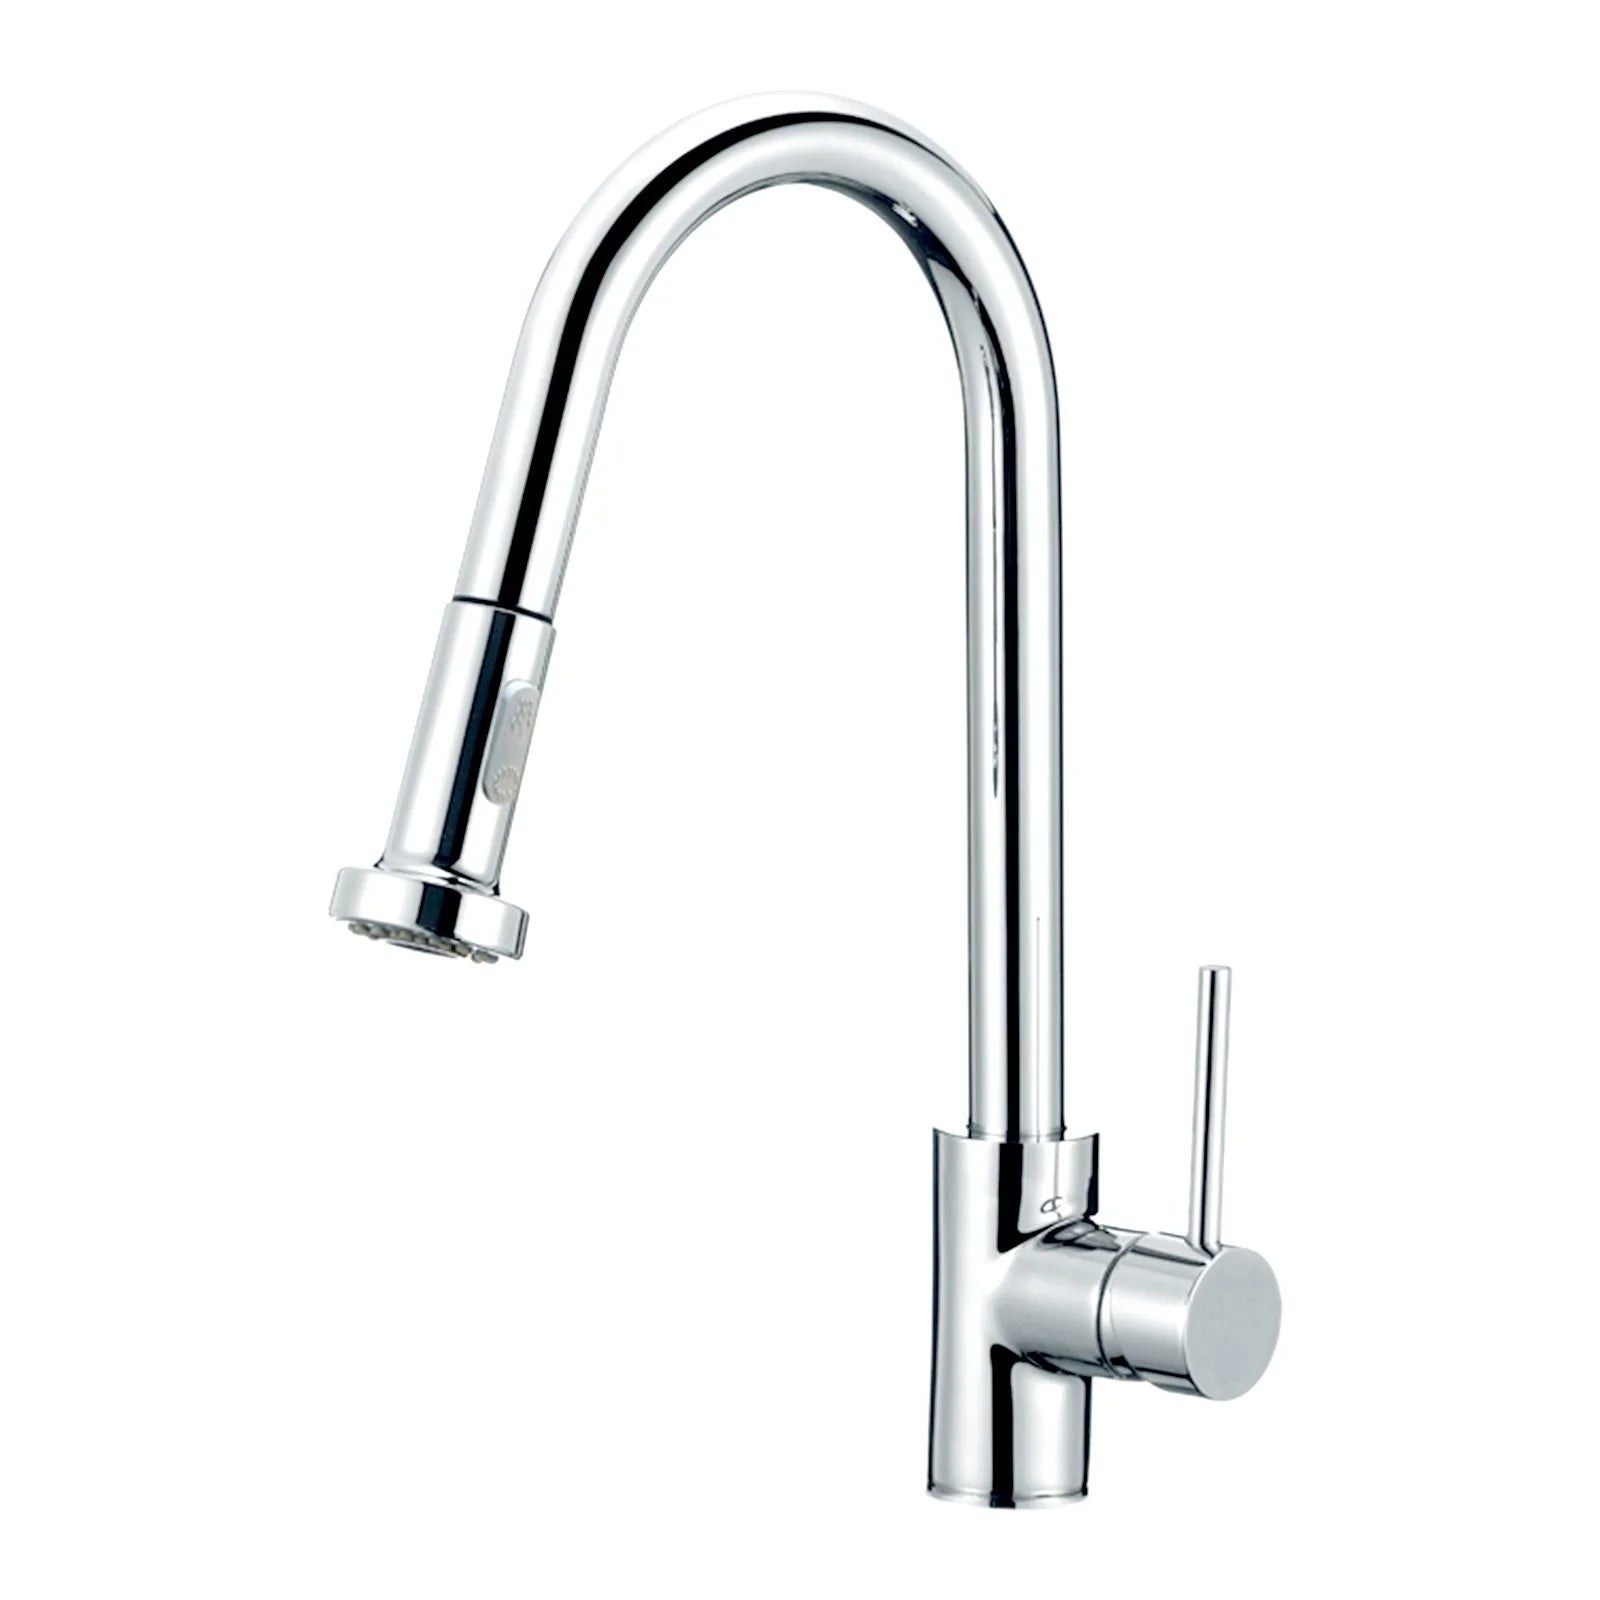 Circular kitchen sink mixer tap with retractable spray nozzle for enhanced functionality-CH1013.KM